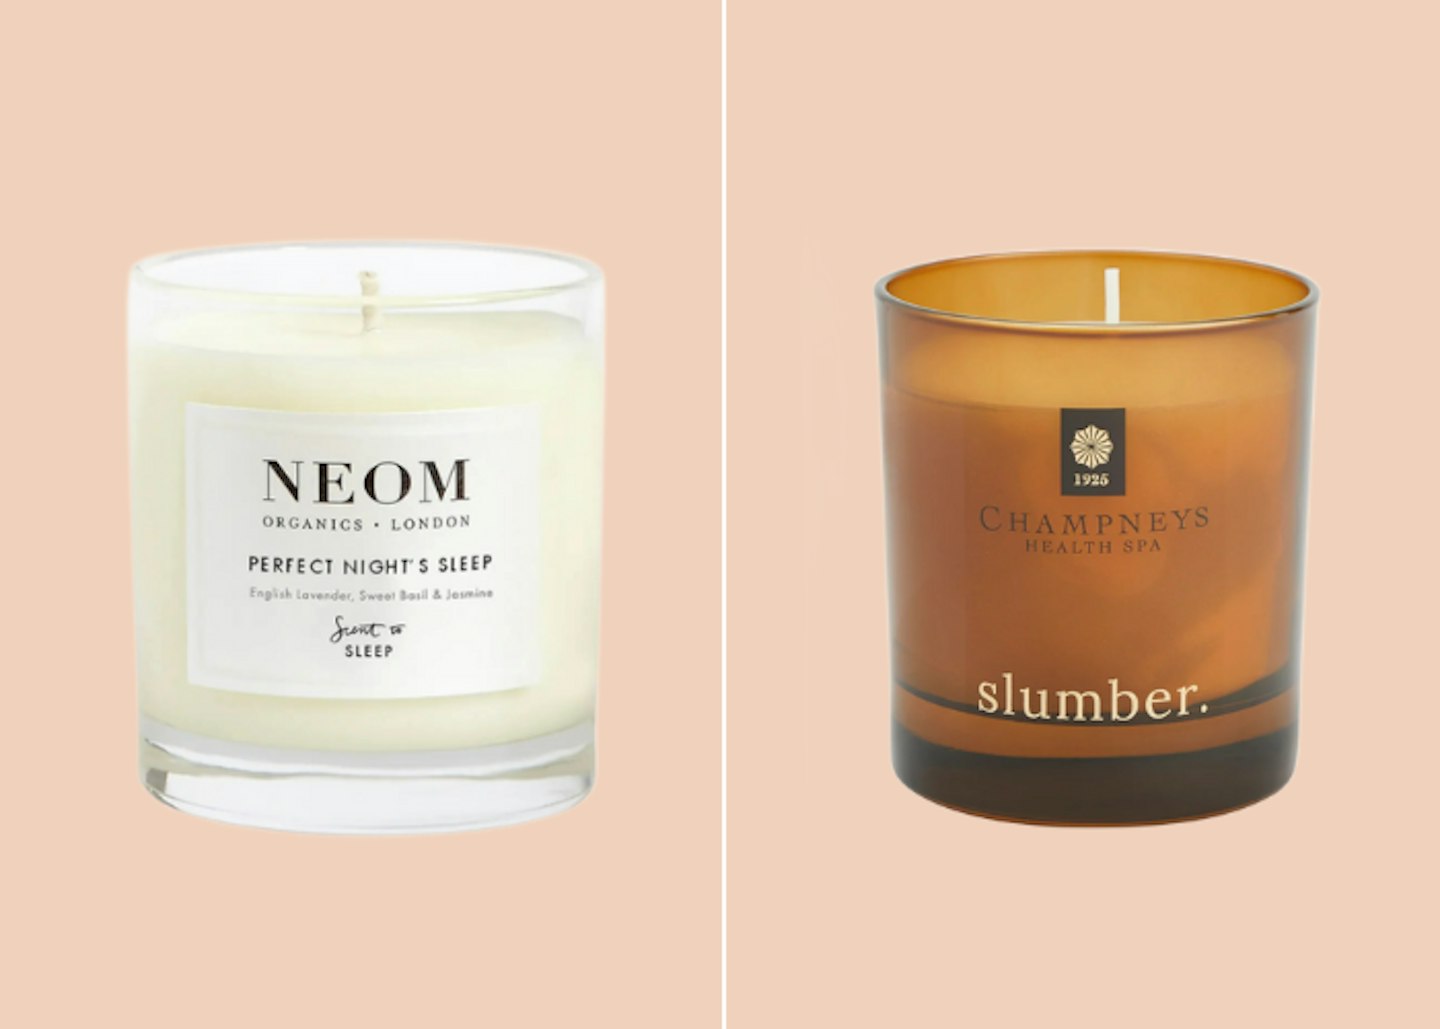 These candles smell AMAZING. Total dupes for Anthropologie candles